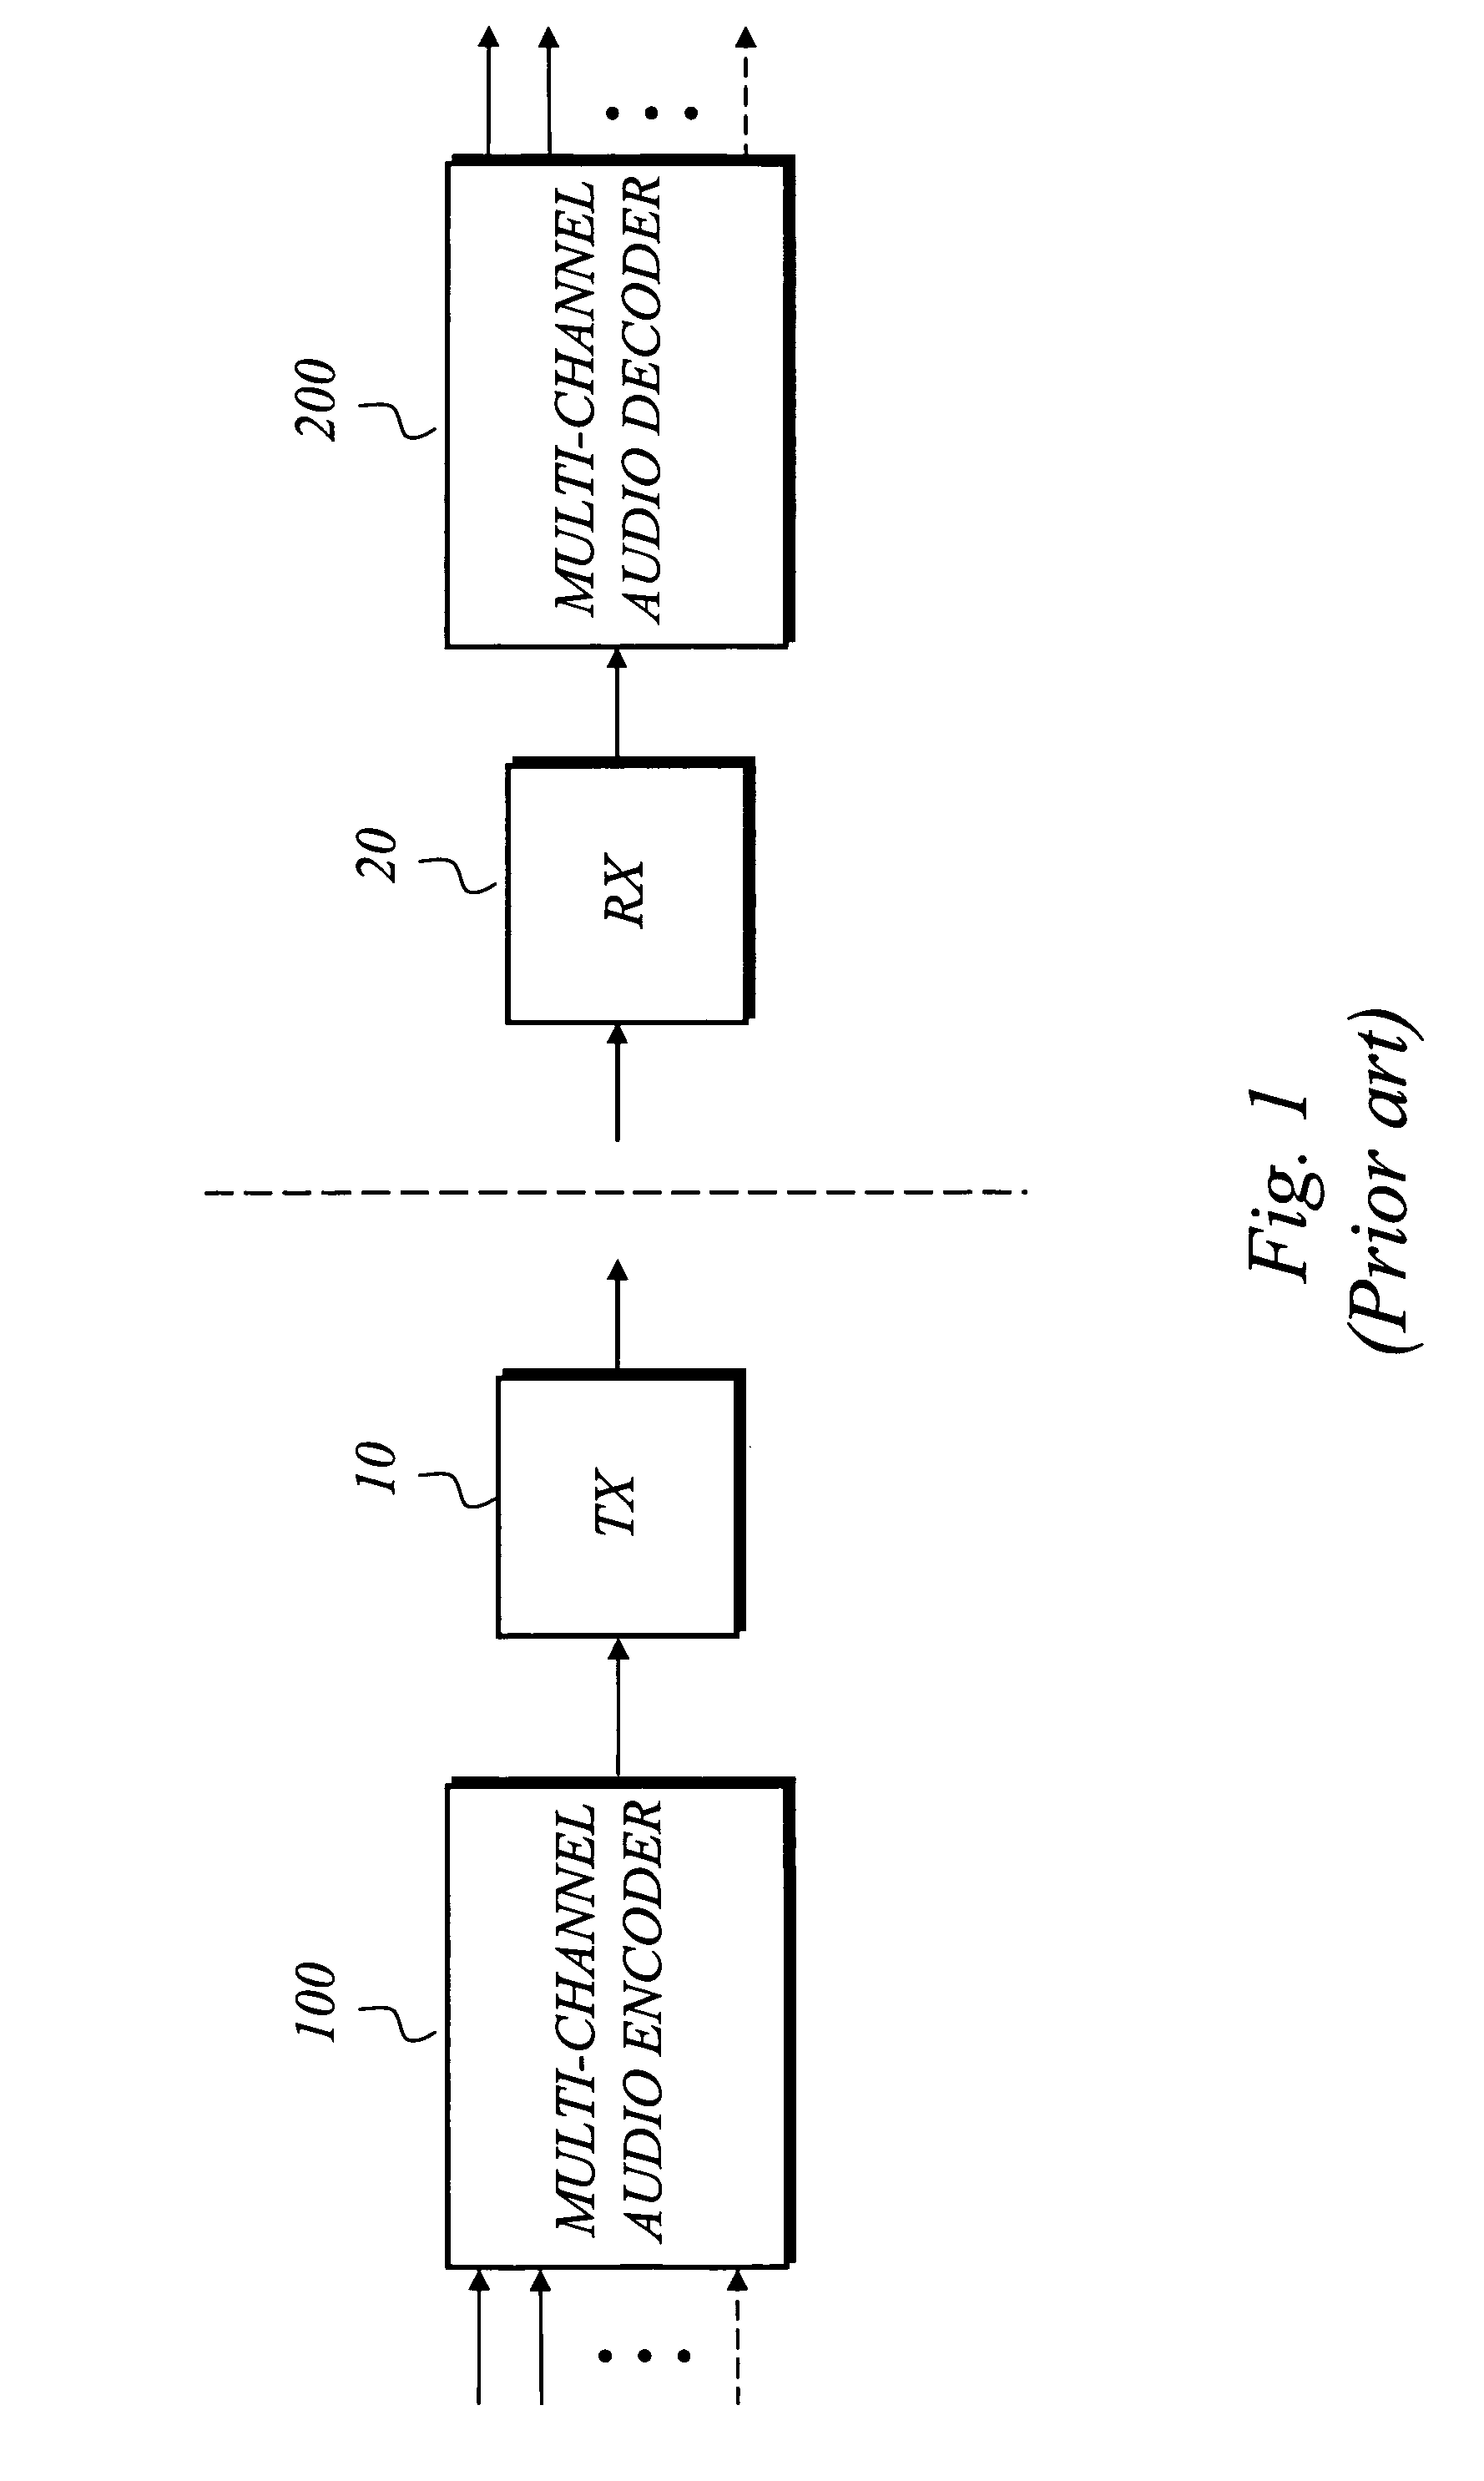 Filter smoothing in multi-channel audio encoding and/or decoding